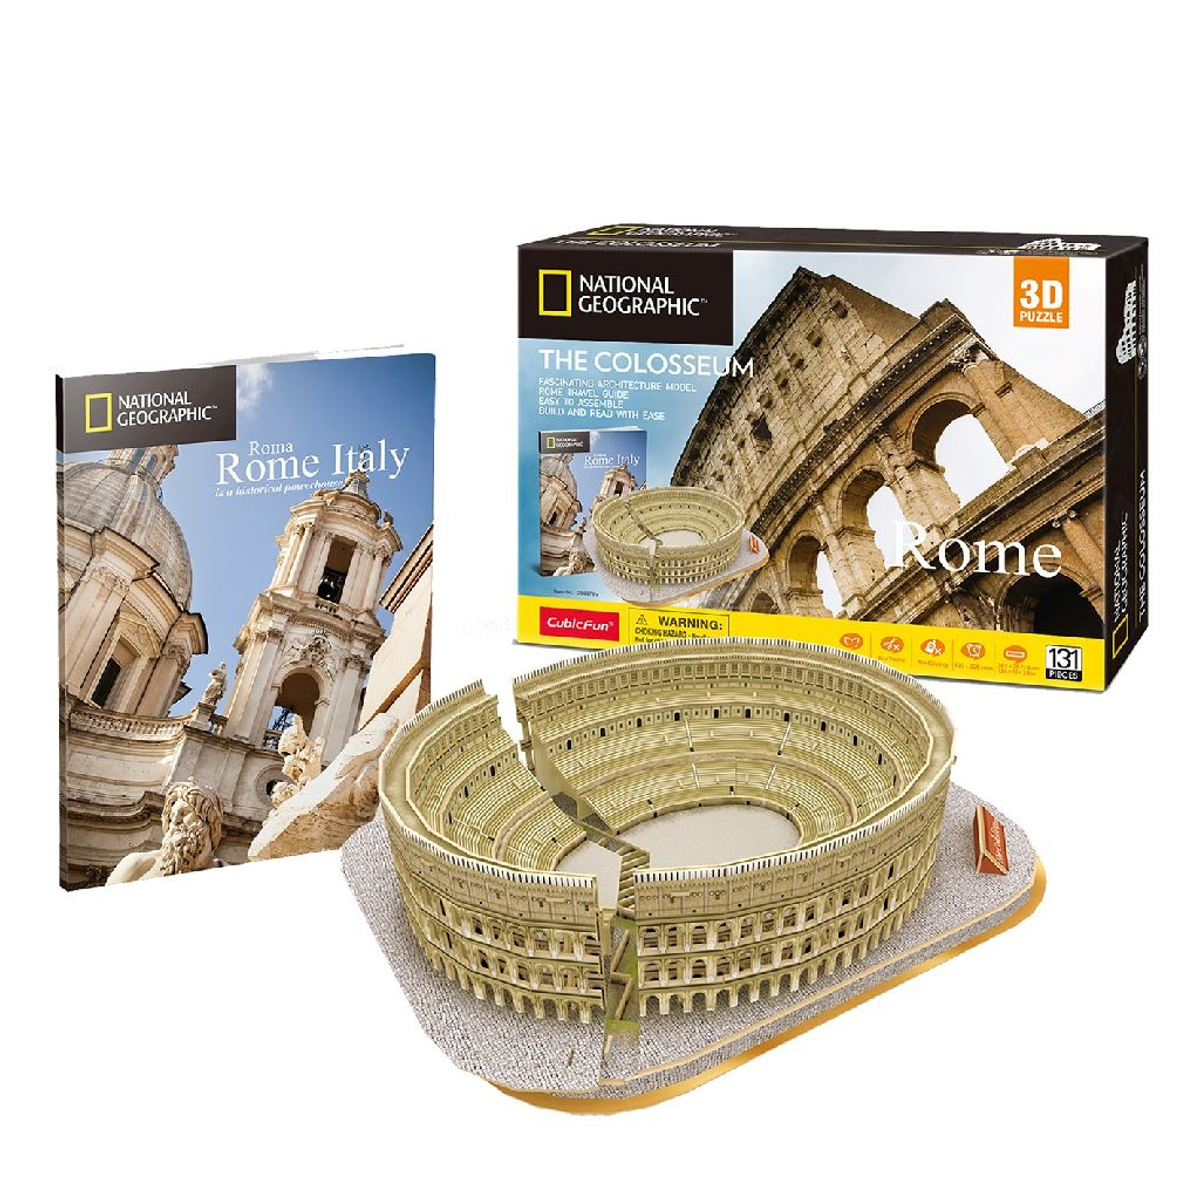 NATIONAL GEOGRAPHIC The Colosseum Puzzle